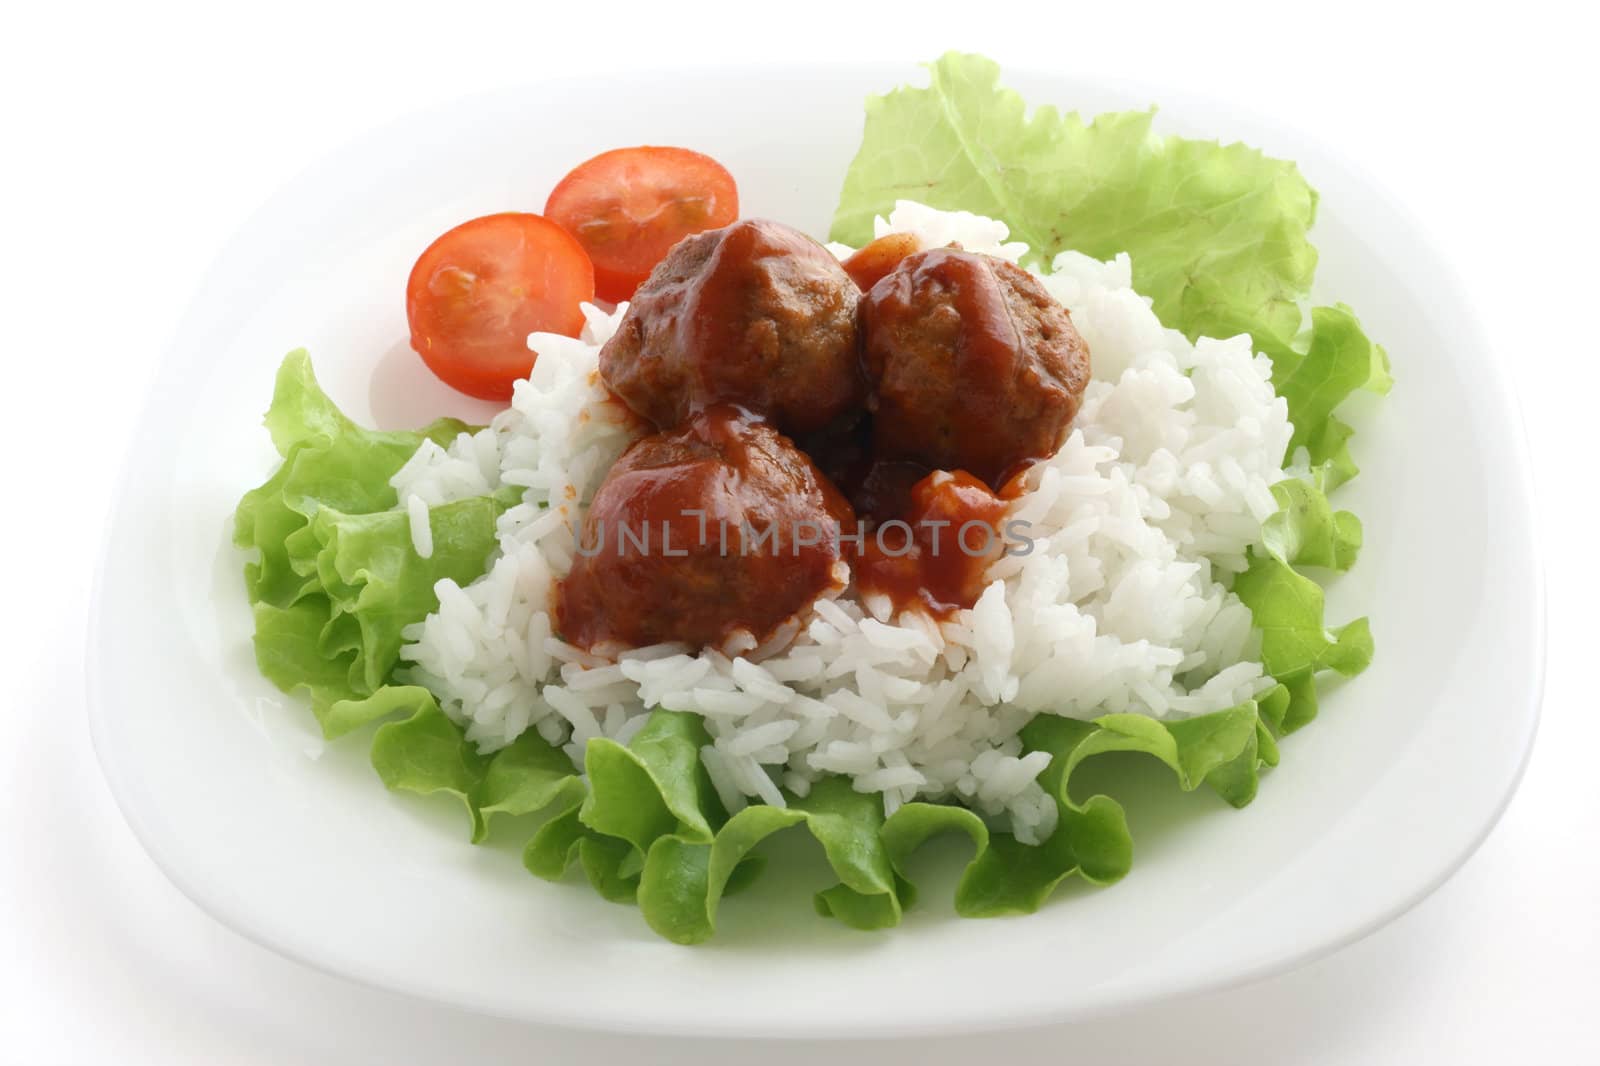 meatballs with rice and lettuce